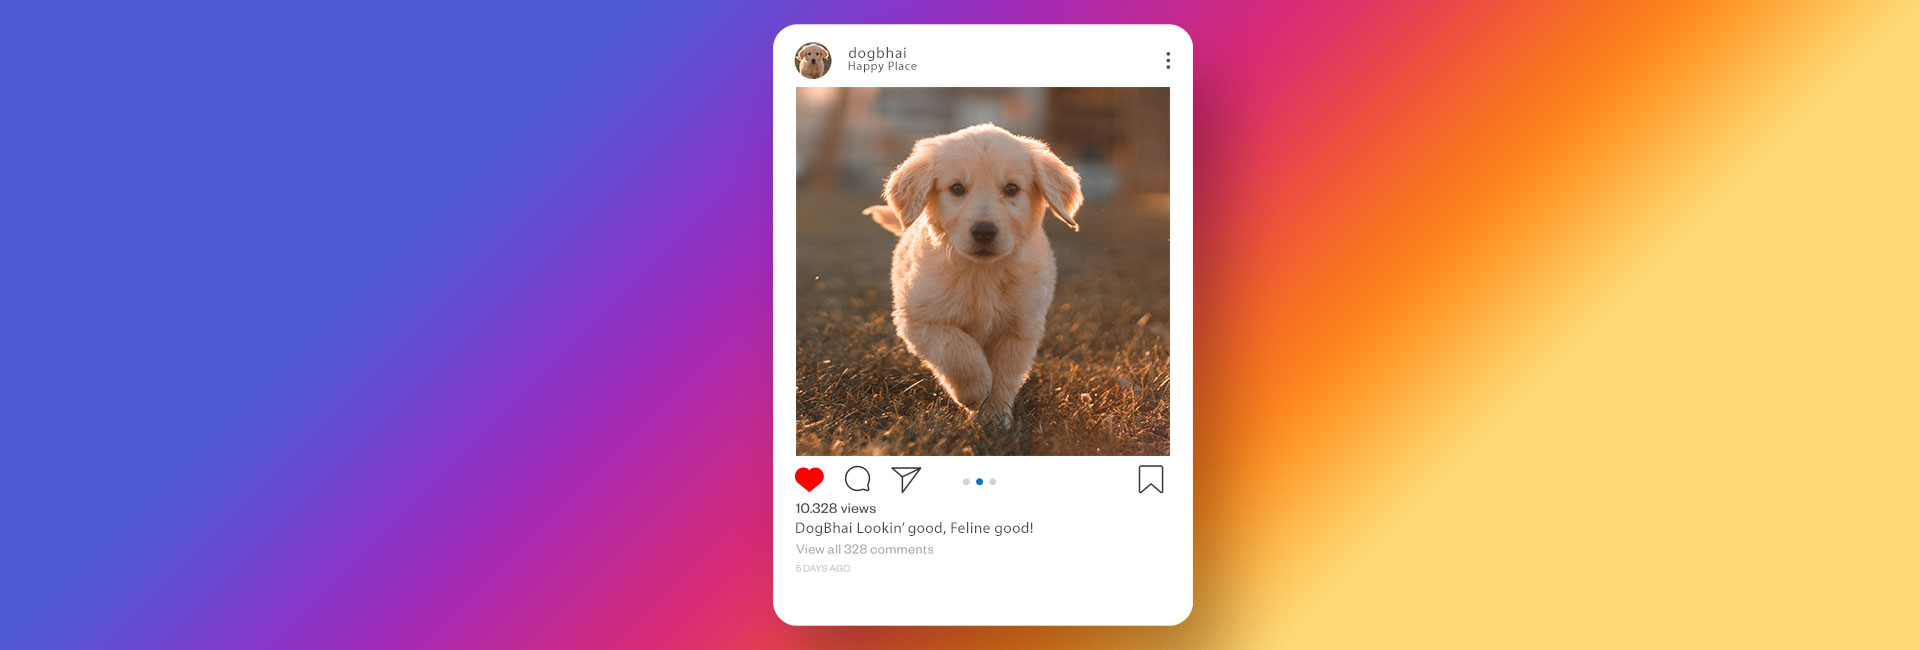 These Pet Instagram Captions Are Pawfect for the Photos of Your Furry Friend